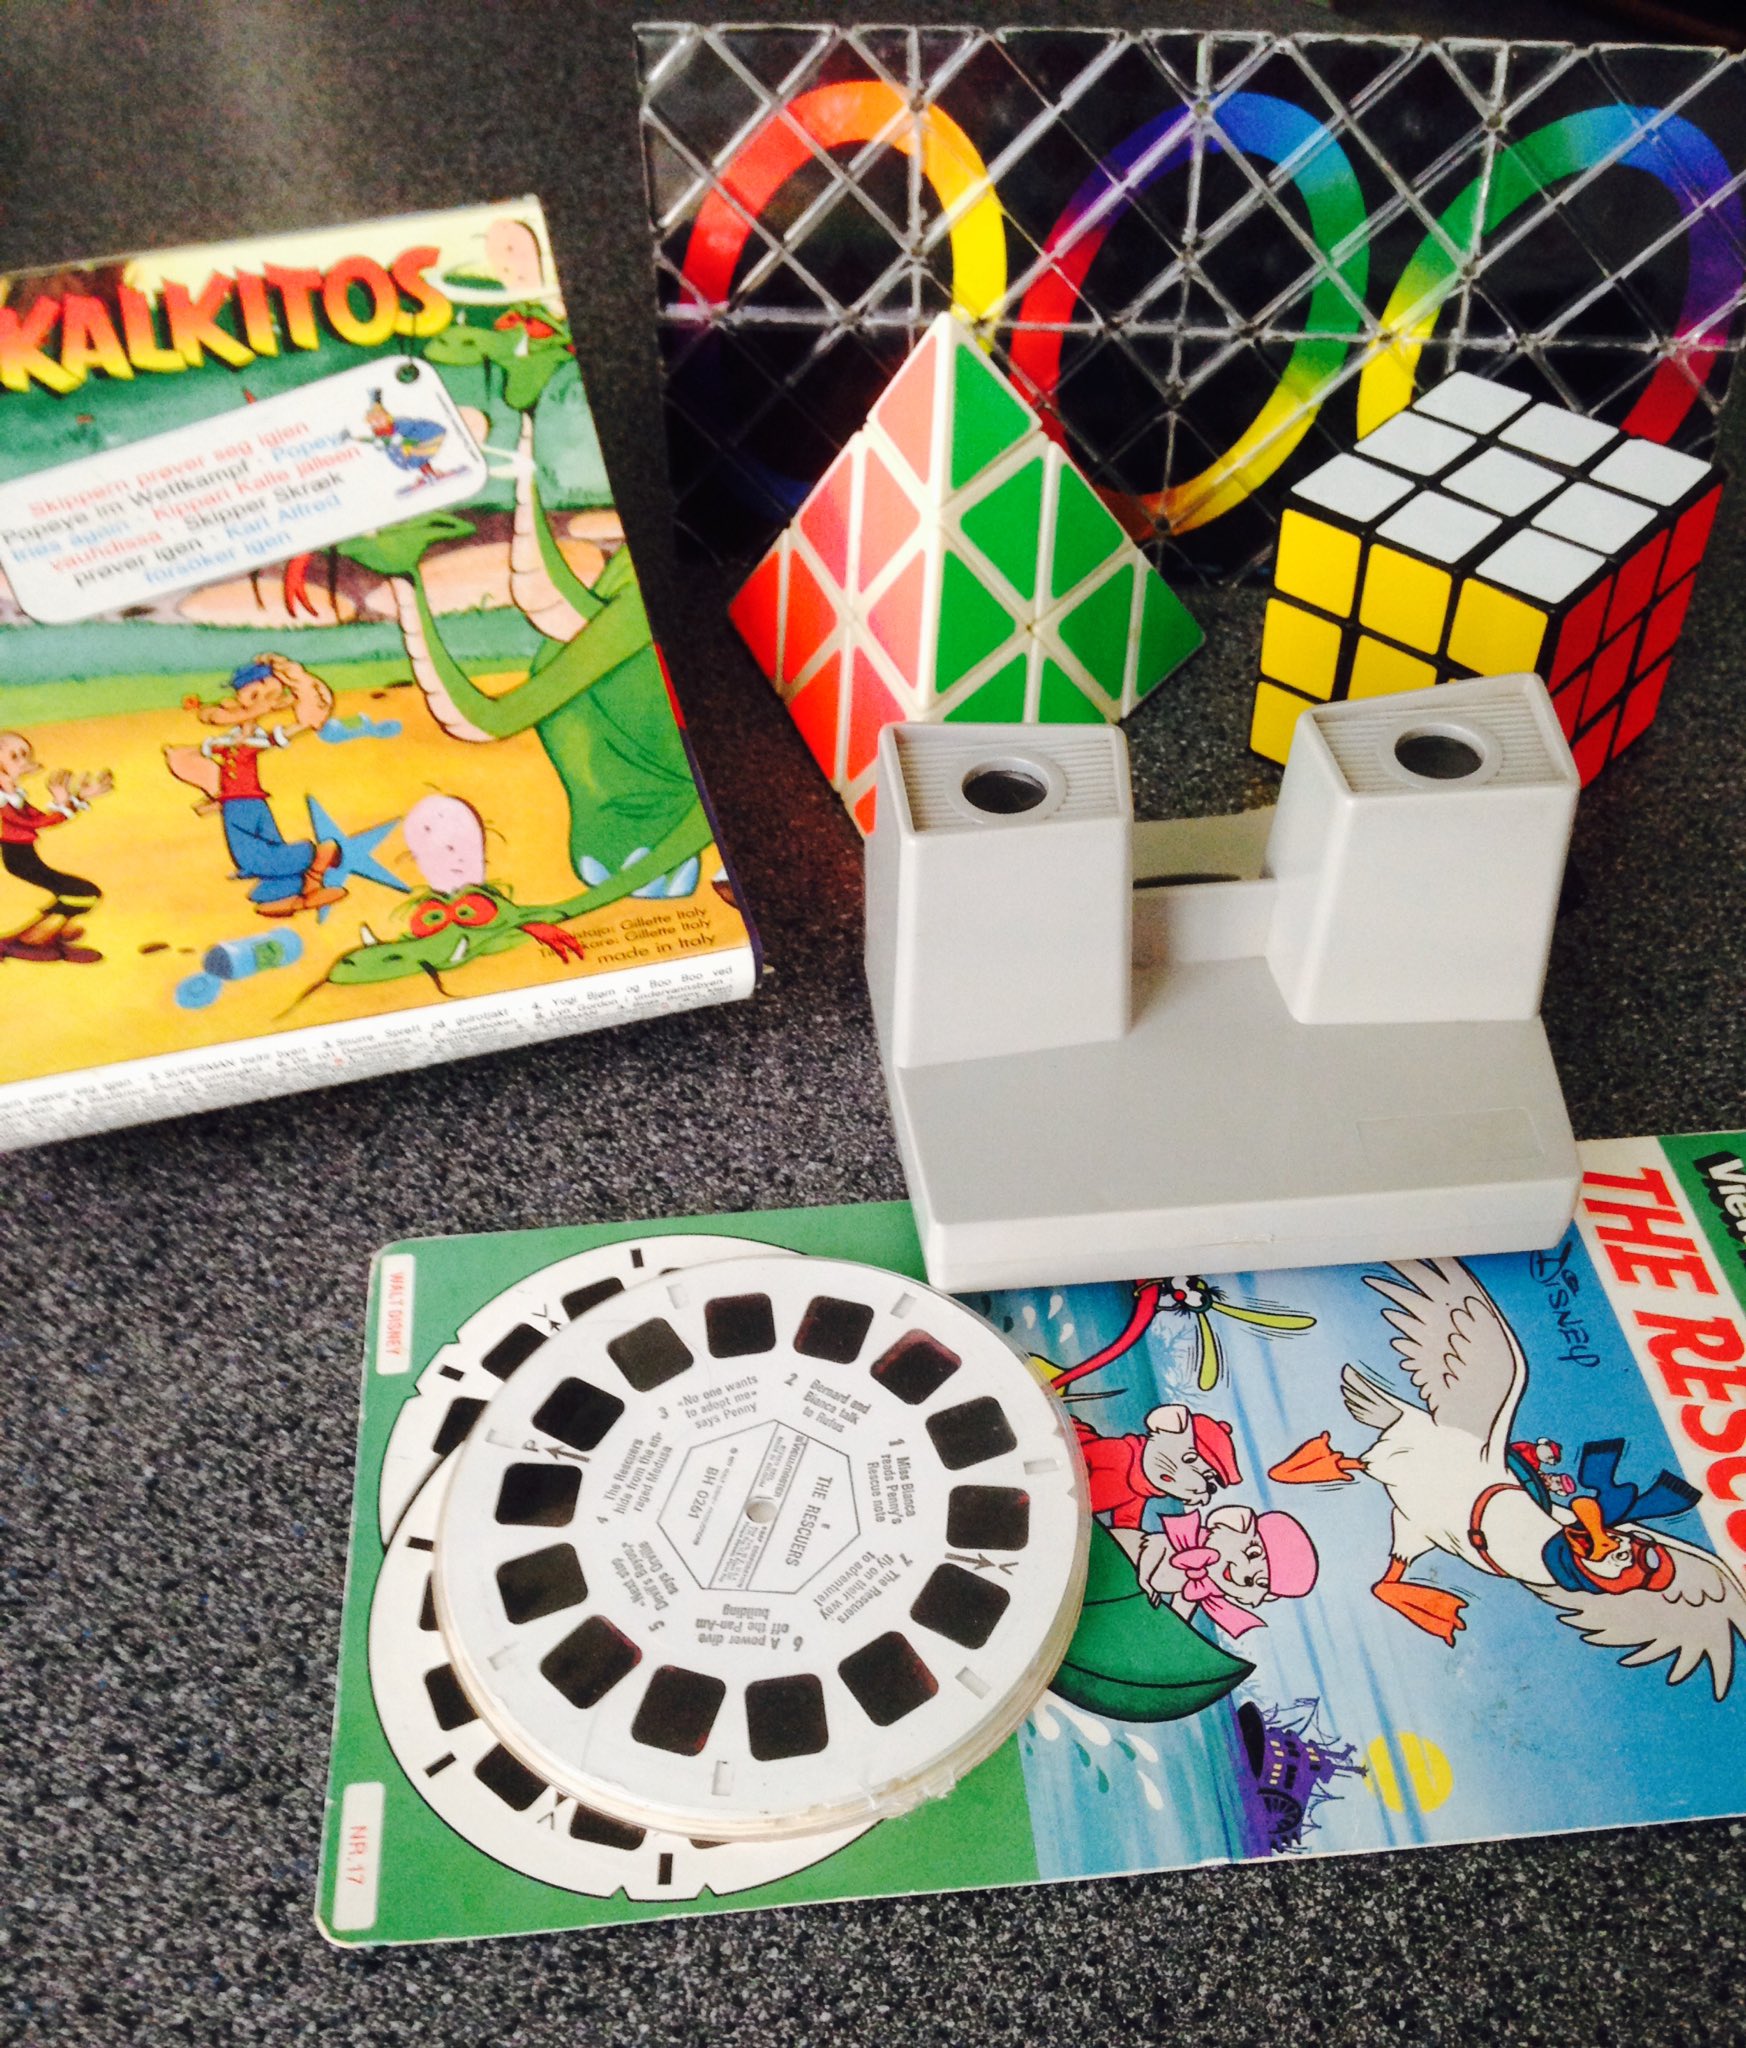 Tarja Karlsson on Twitter: "Discoveries from the 80's 😊 @Rubiks_Official  @ViewMaster @kalkitosSG #viewmaster #kalkitos #retro #lelut  https://t.co/DboHBWhTC2" / Twitter